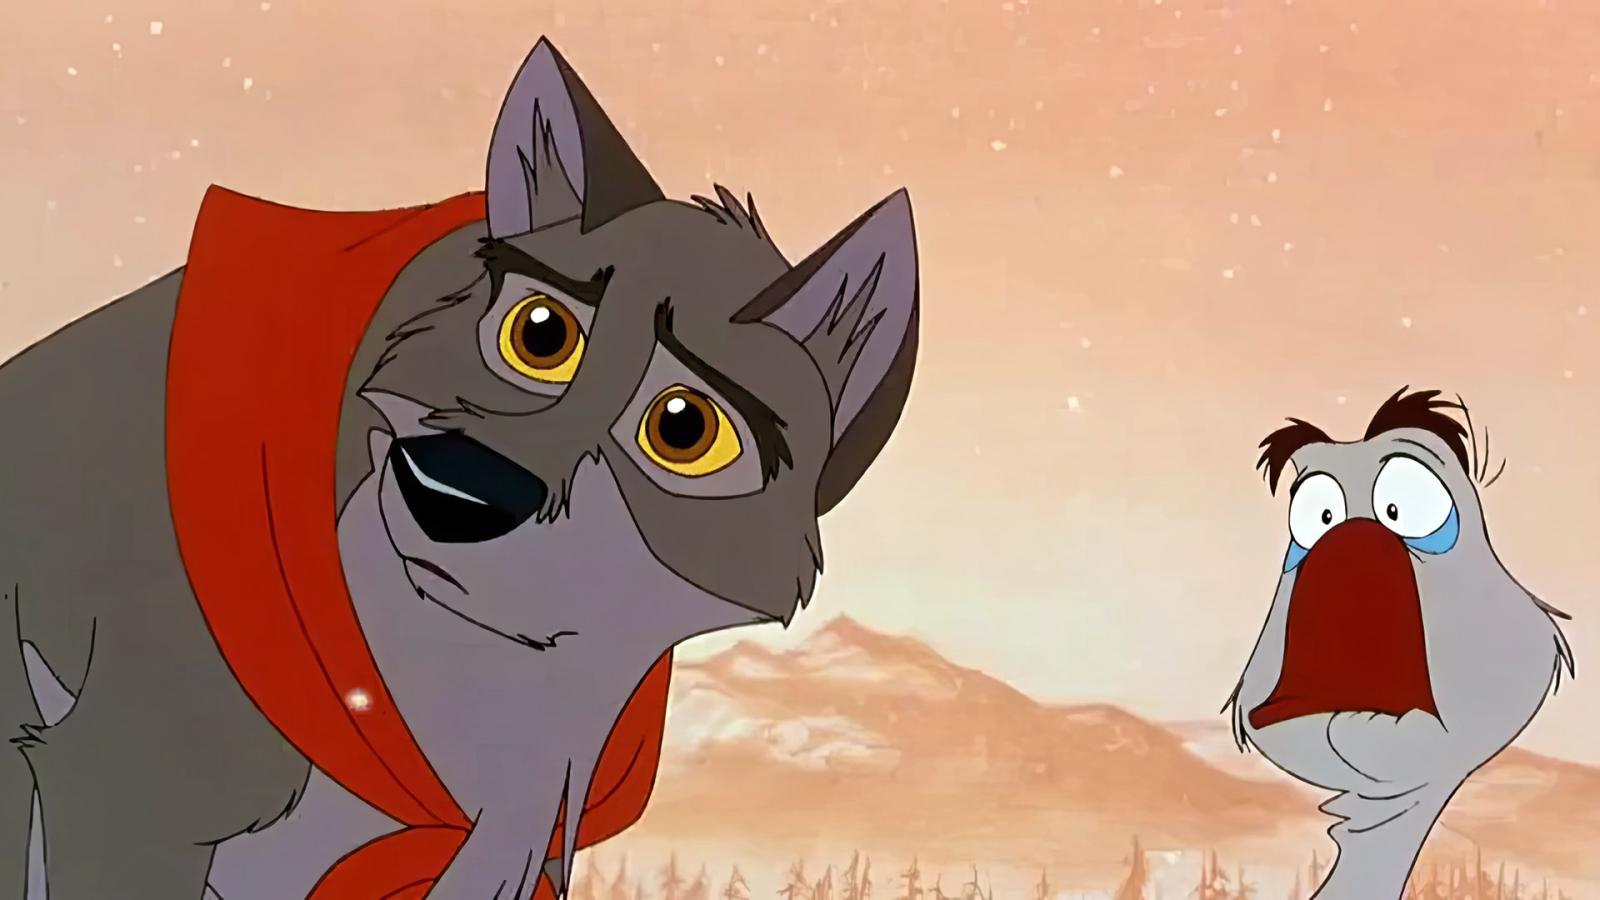 10 Underrated Animated Movies from the '90s You've Missed - image 9